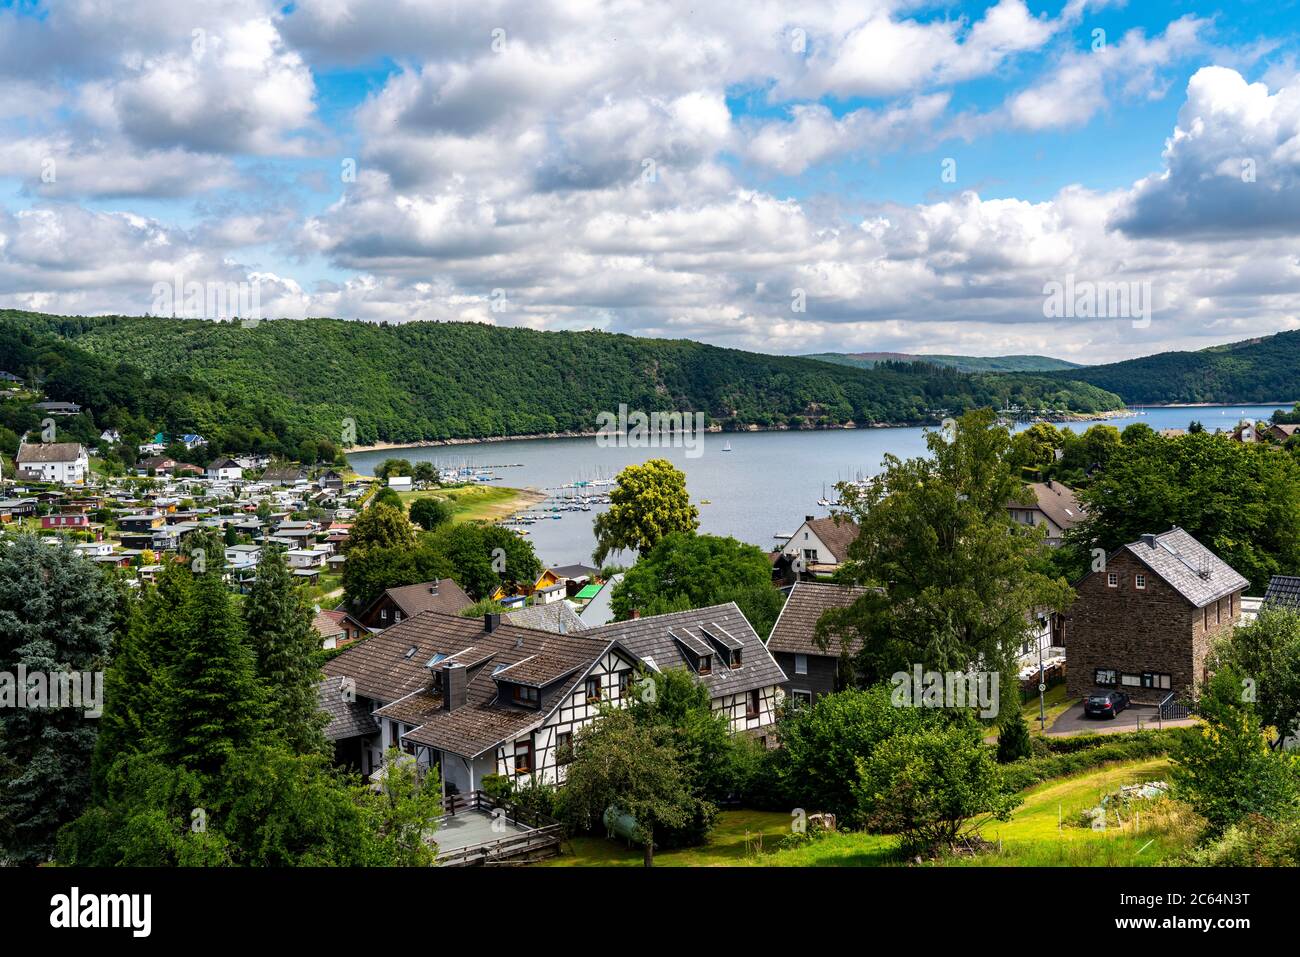 Rursee lake, reservoir, the village Woffelsbach, camping site, permanent  campers, Nationalpark Eifel, NRW, Germany Stock Photo - Alamy